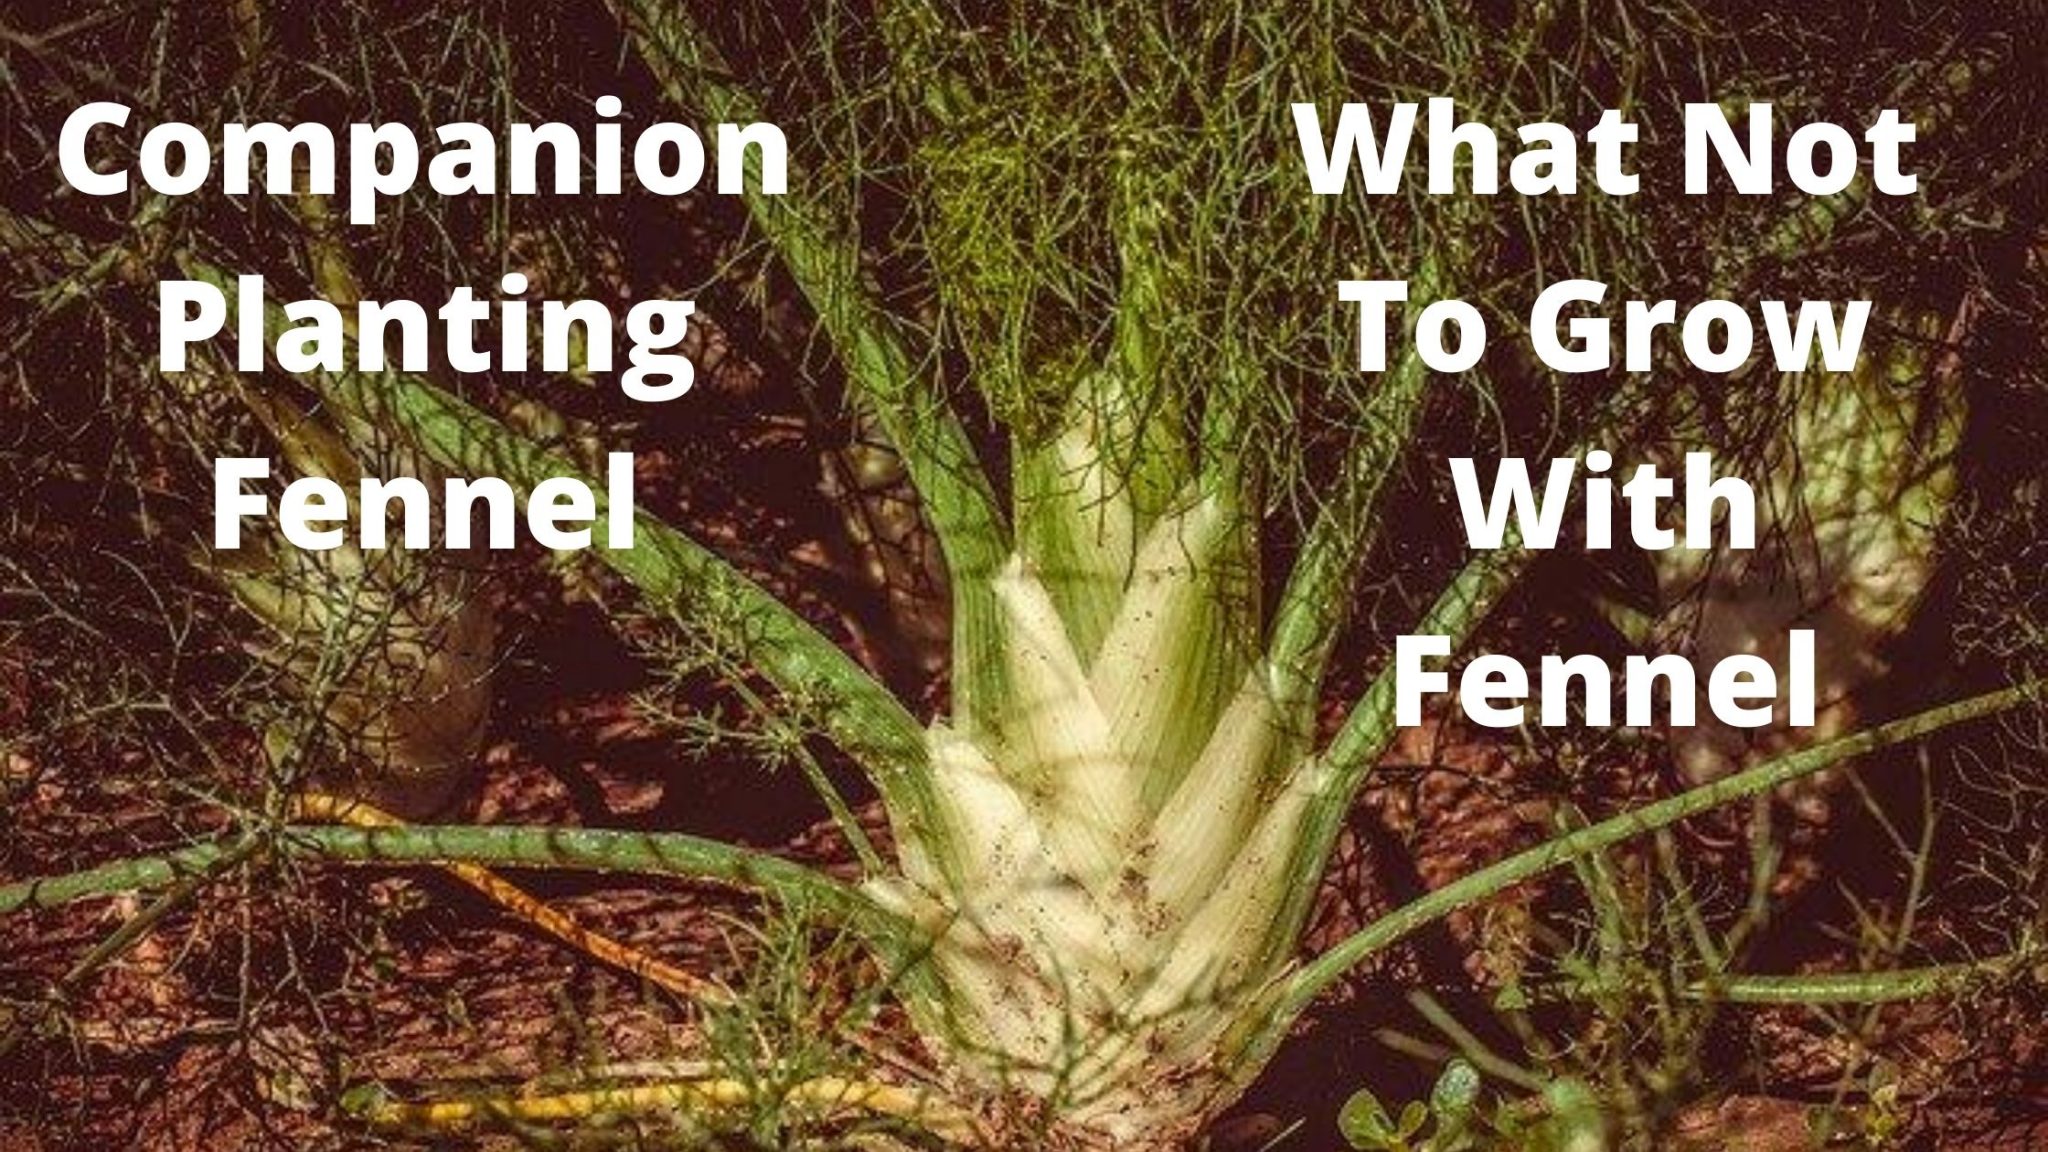 Image of Onions and Fennel companion planting